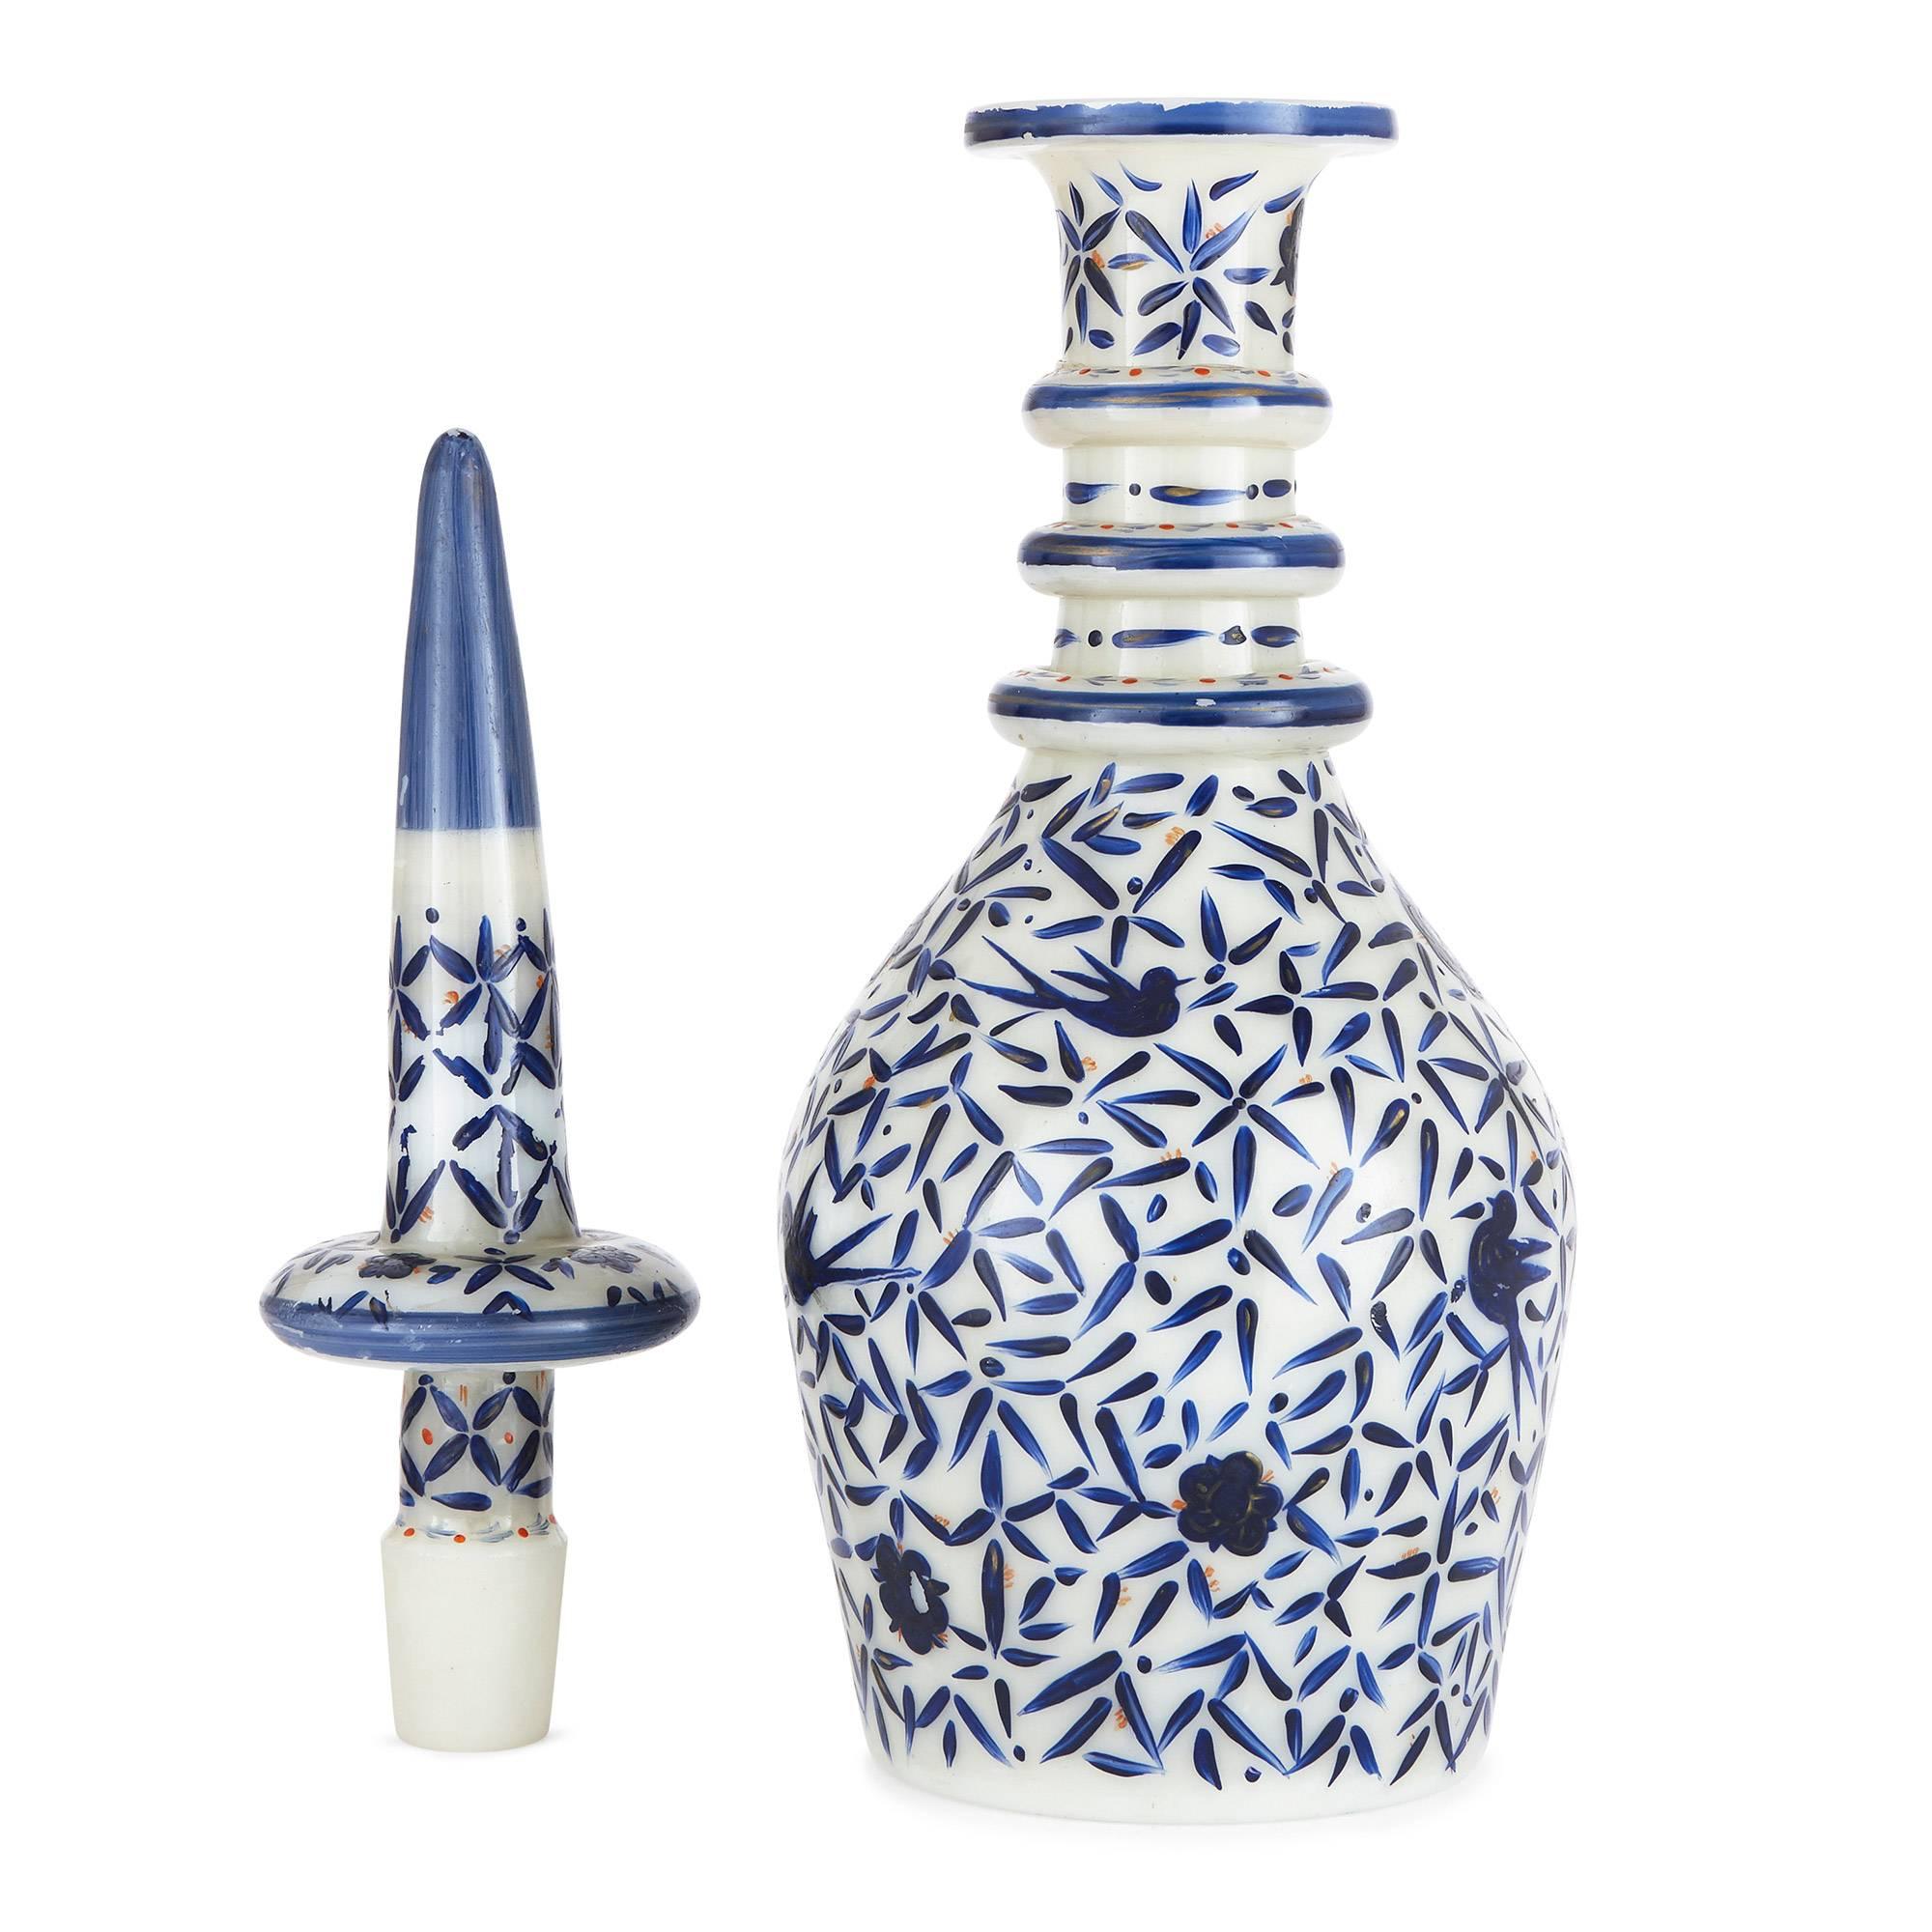 These charming antique Bohemian glass decanters are notable for their stunning blue and white patterning, and their endearing simplistic design, befitting both the antique interior and the modern alike. 

The decanters are of identical shape and